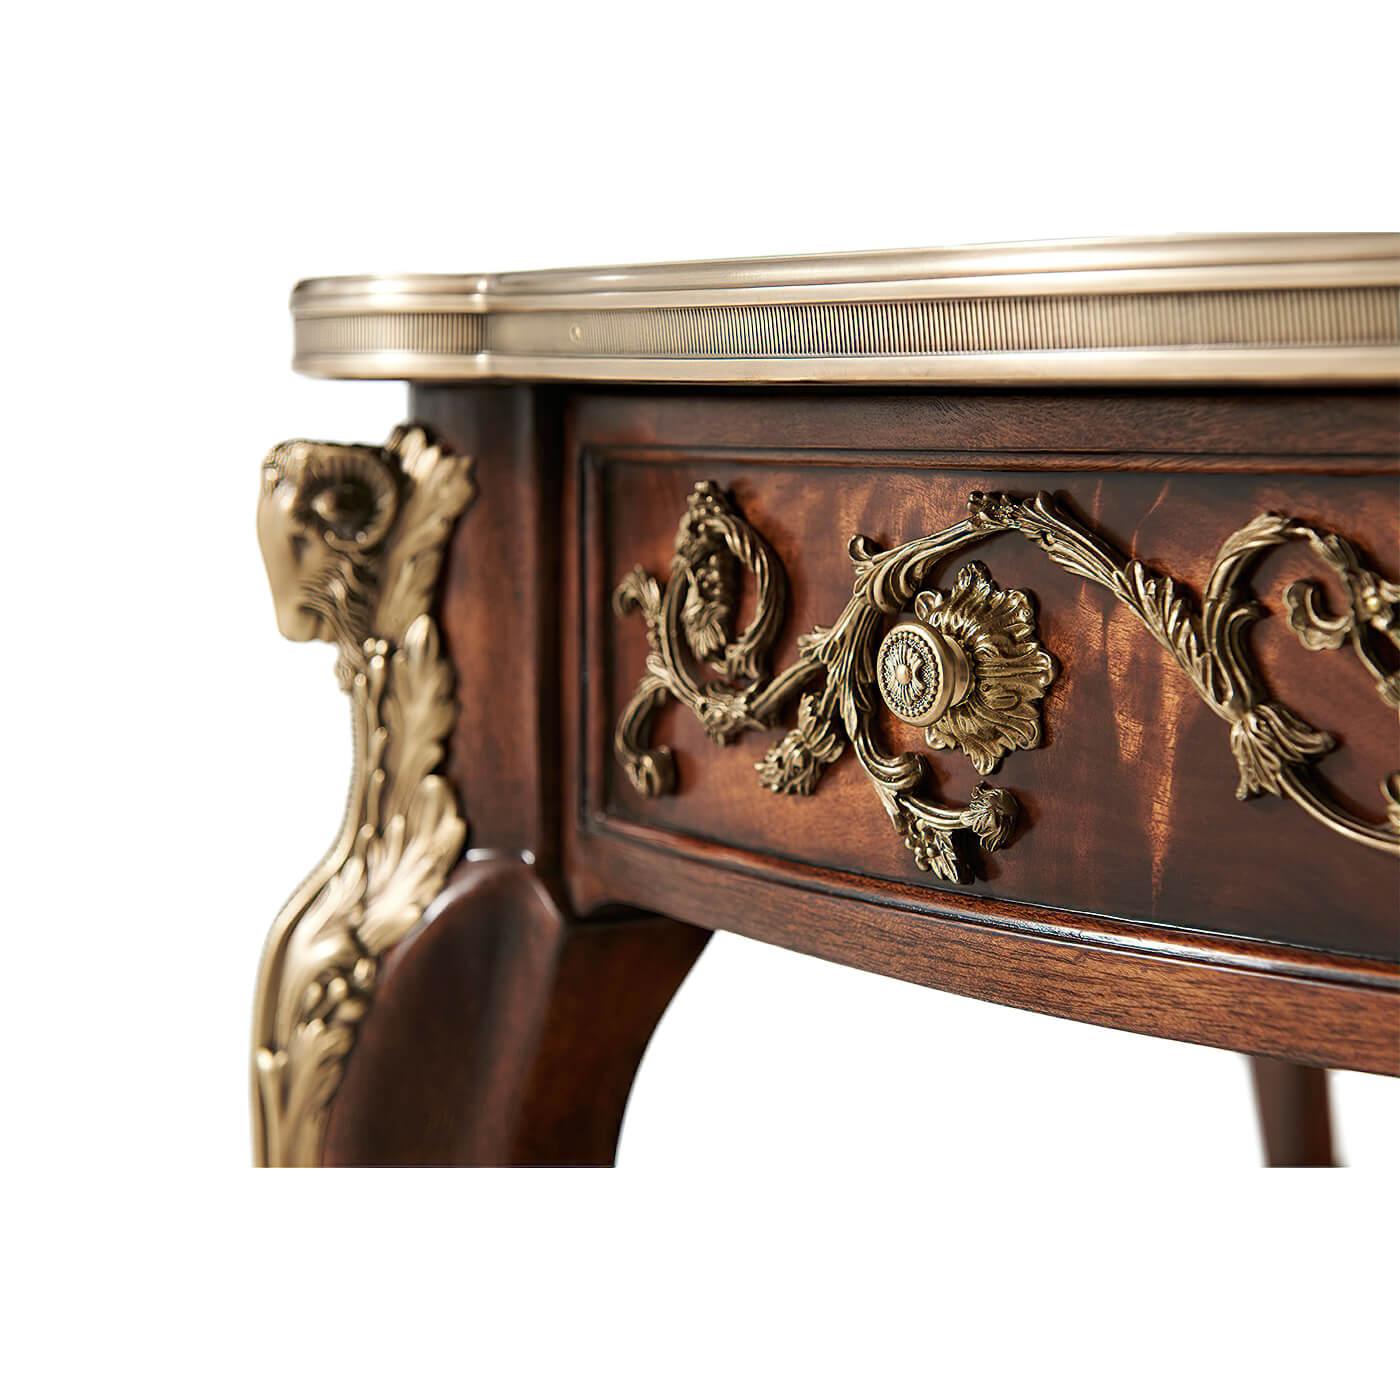 A French Louis XV style mahogany cross-banded banded cocktail table applied with very fine brass mounts, the brass bound circular top with protruding corners, the frieze with two opposing drawers, on ram's head capital cabriole legs joined by an